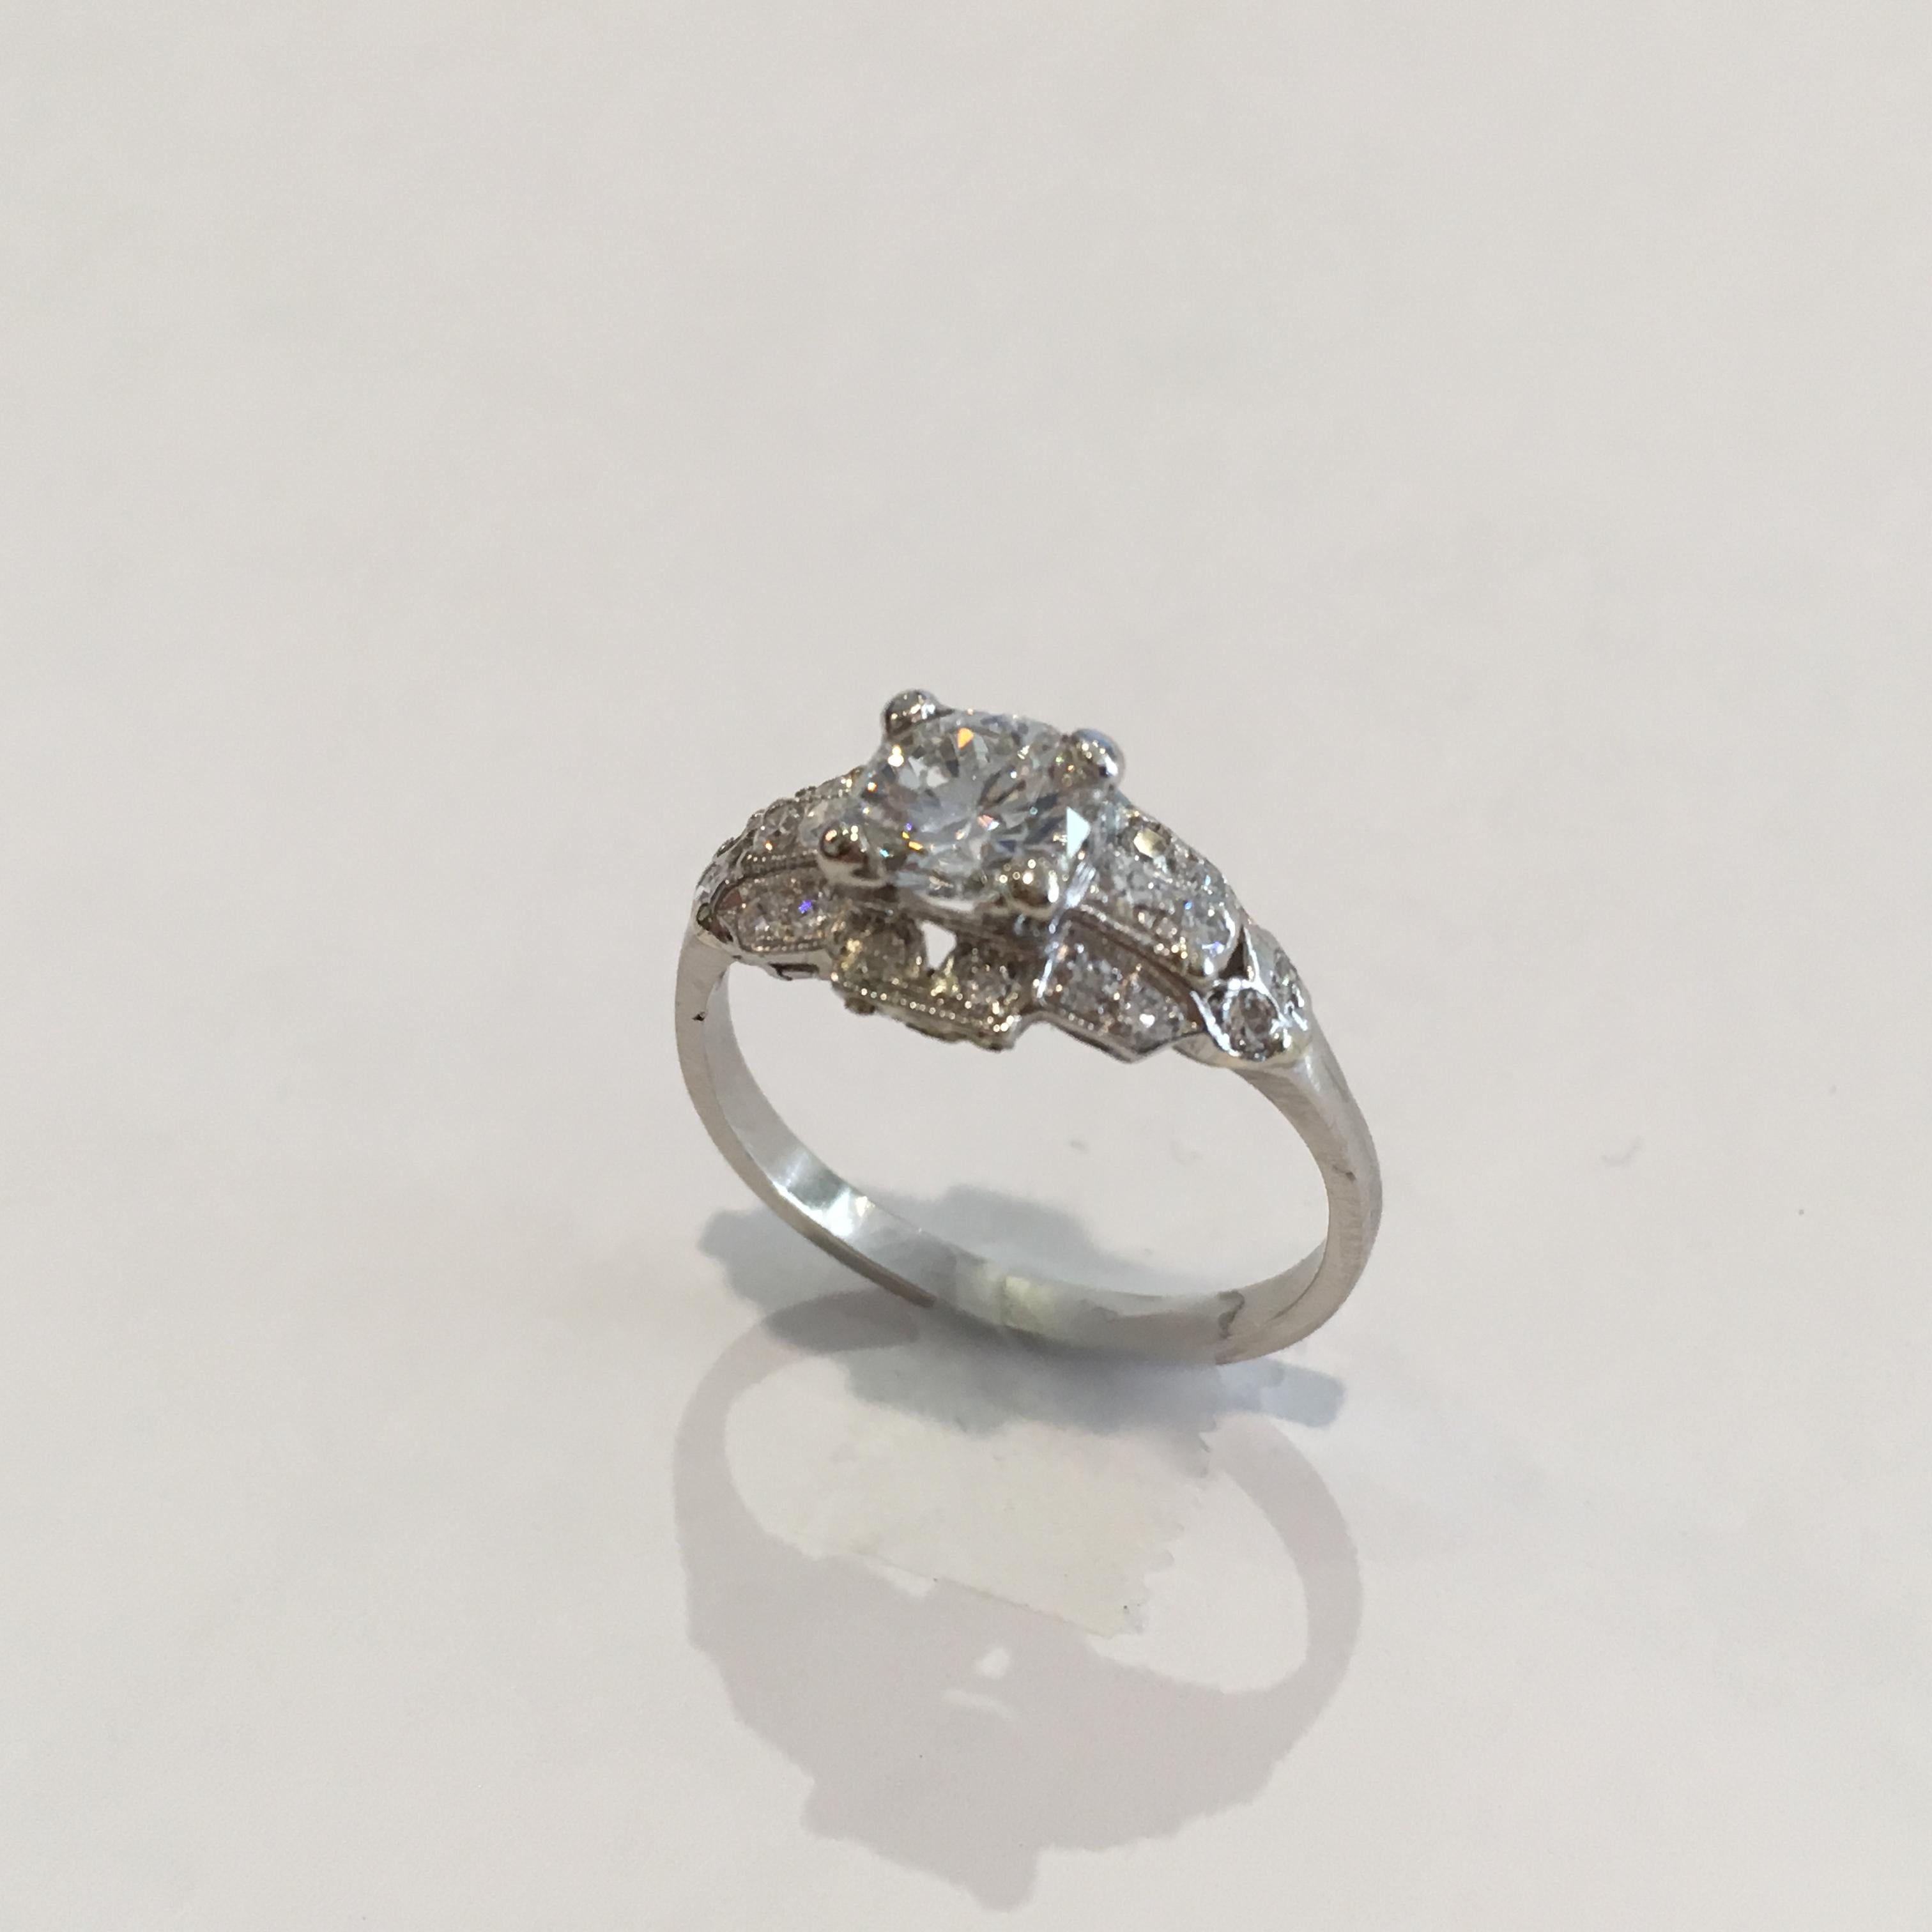 Ladies vintage platinum diamond ring.
Tests platinum and weighs 3.6 grams.
The center diamond is a round brilliant cut, .76 carats, F color, VS2 clarity, good cut, GIA grading certificate # 2185812582.
The side diamonds are round, single-cuts, .32